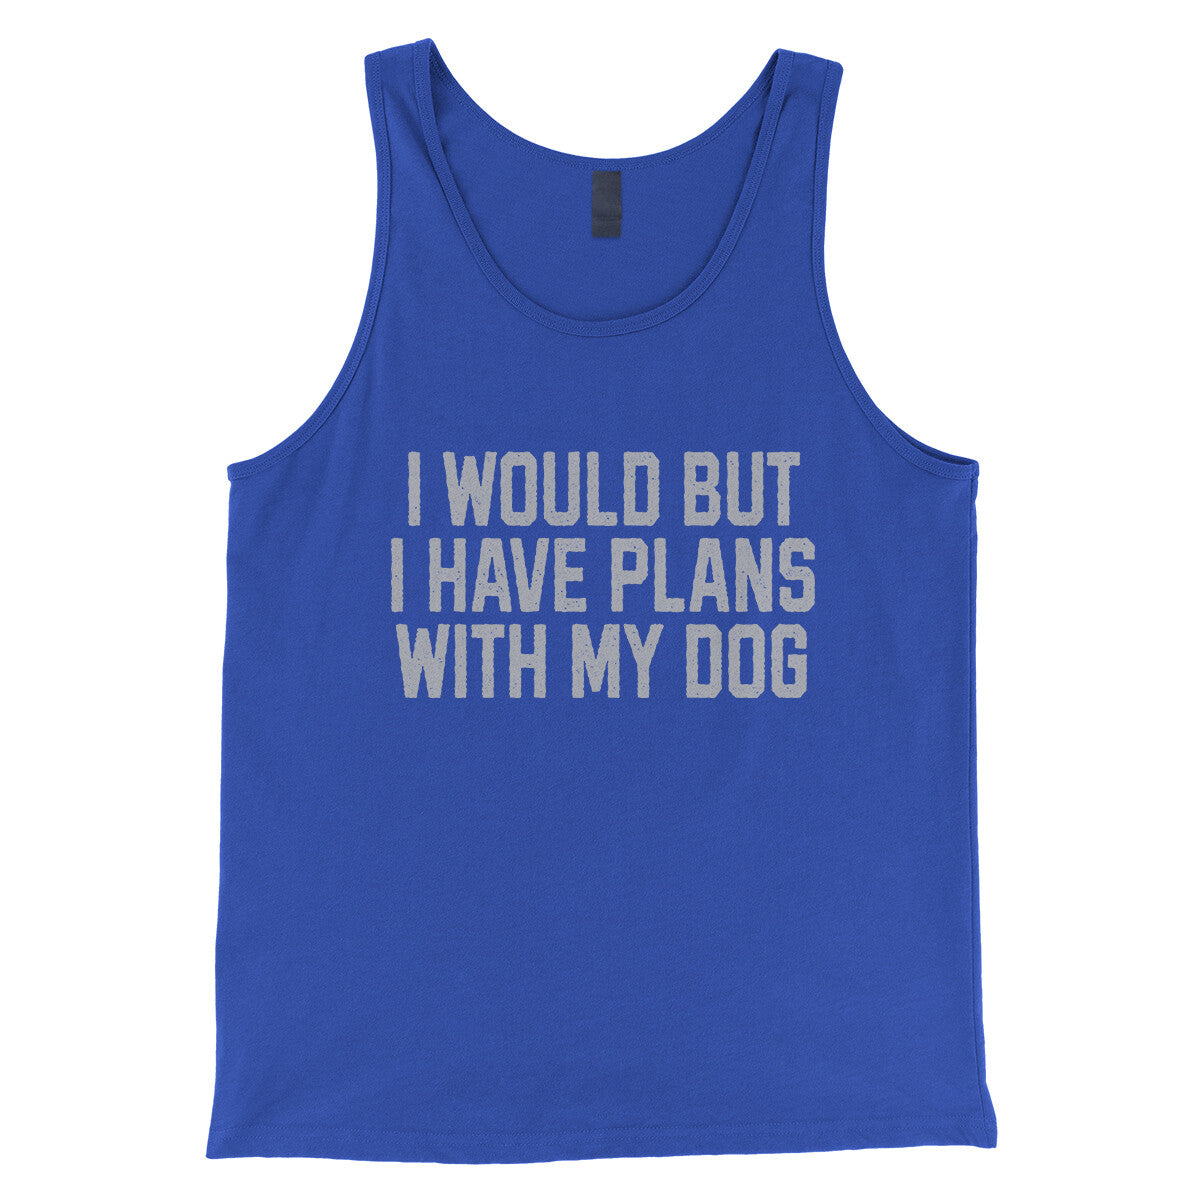 I Would but I Have Plans with My Dog in True Royal Color